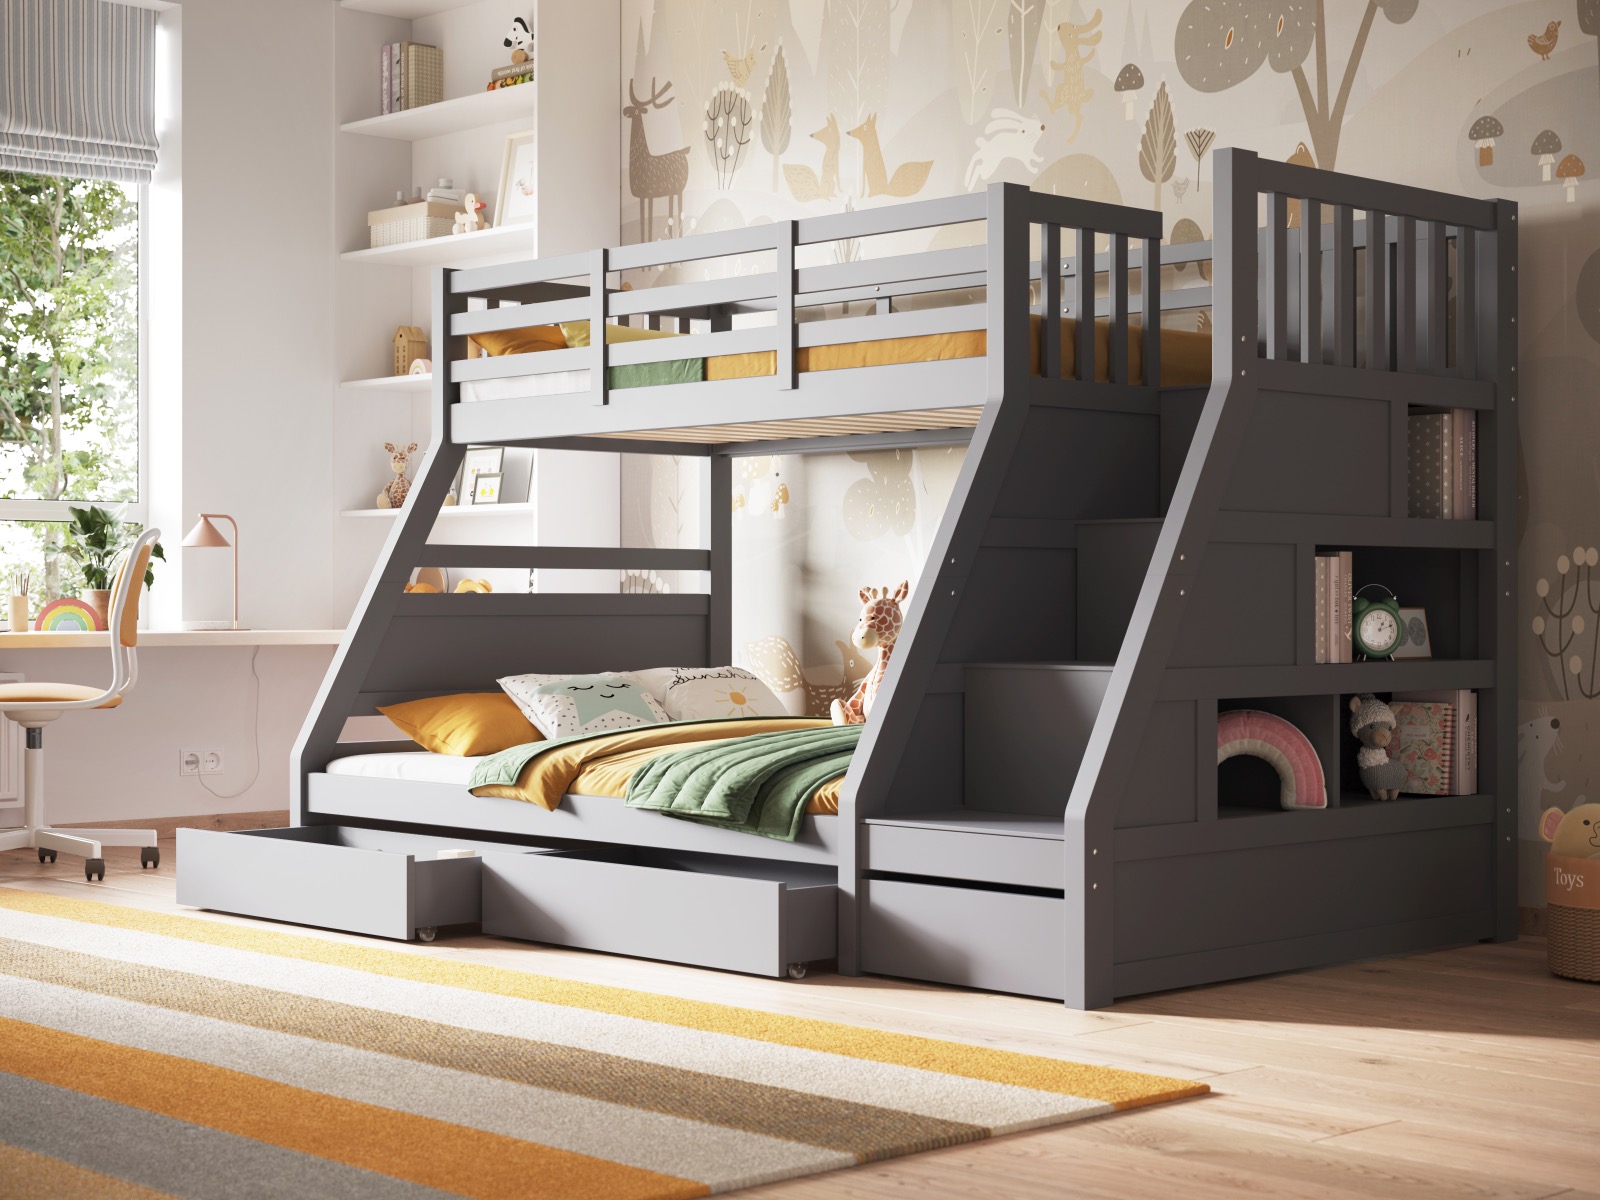 Flair Lunar Staircase Triple Bunk Bed with Shelves Grey